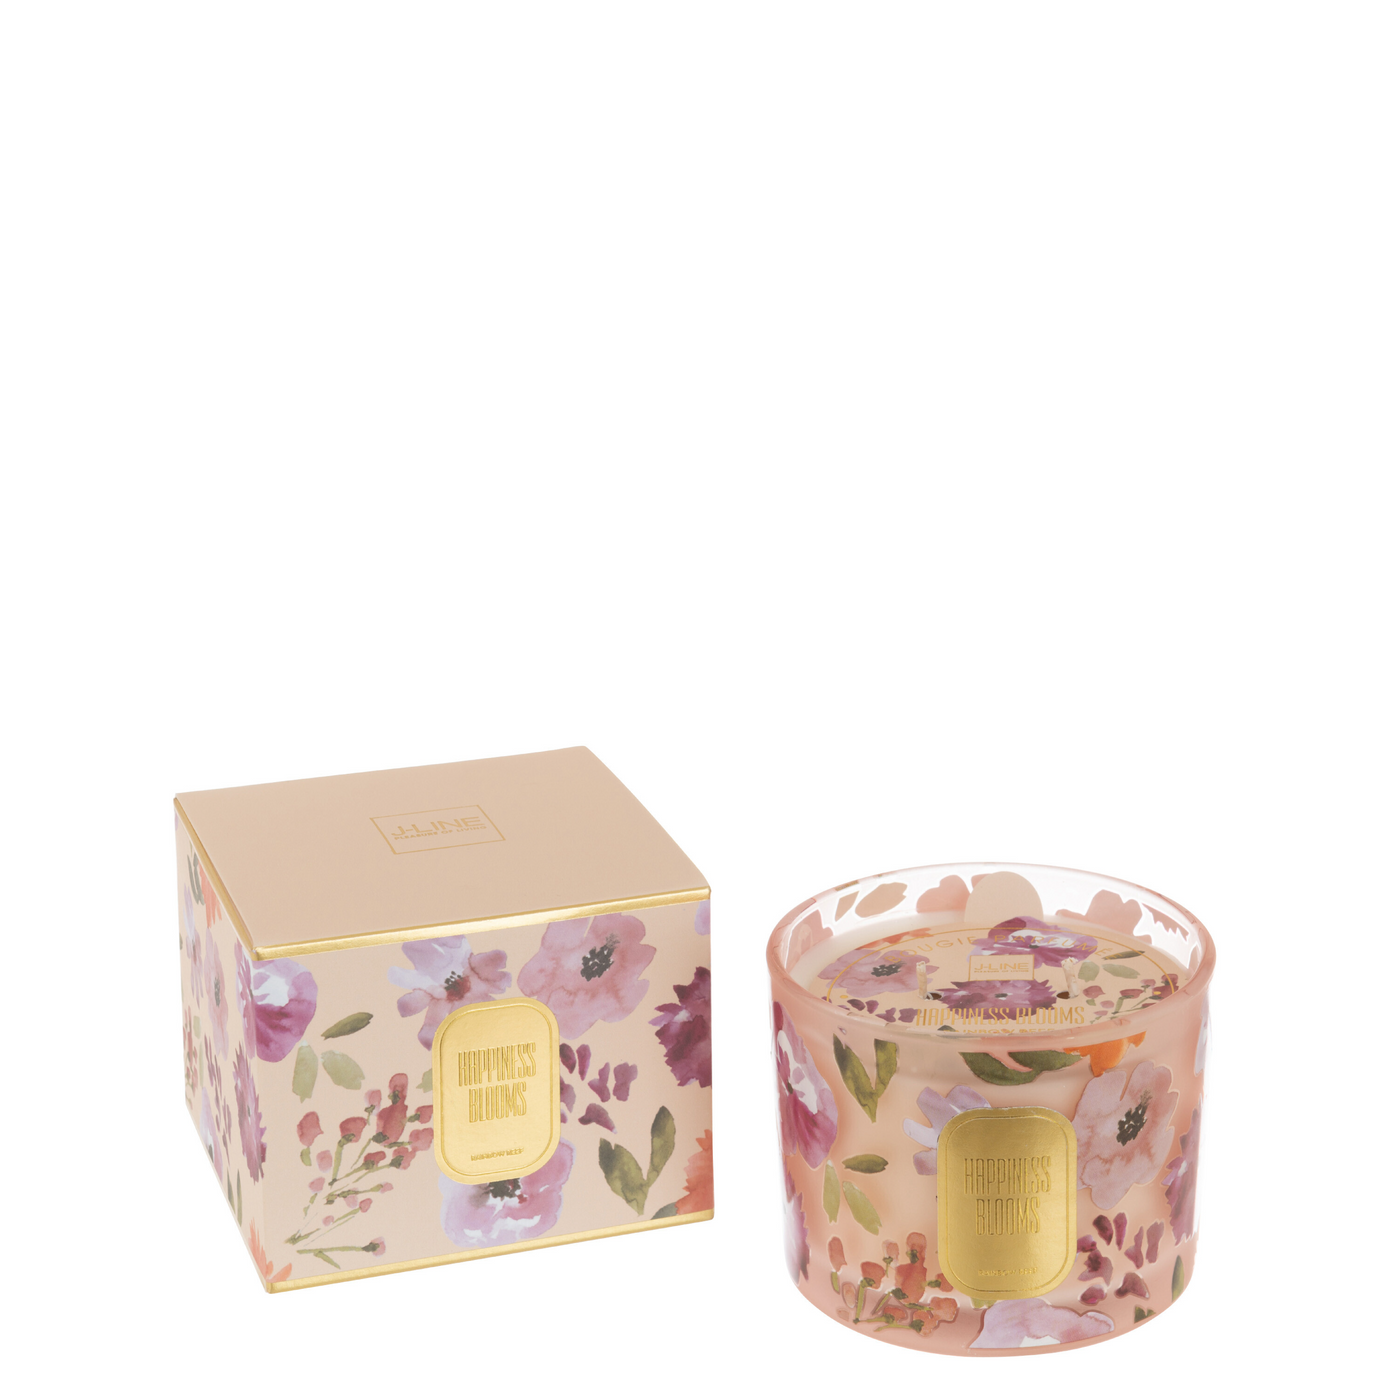 SCENTED CANDLE HAPPINESS BLOOMS PINK SMALL-35U